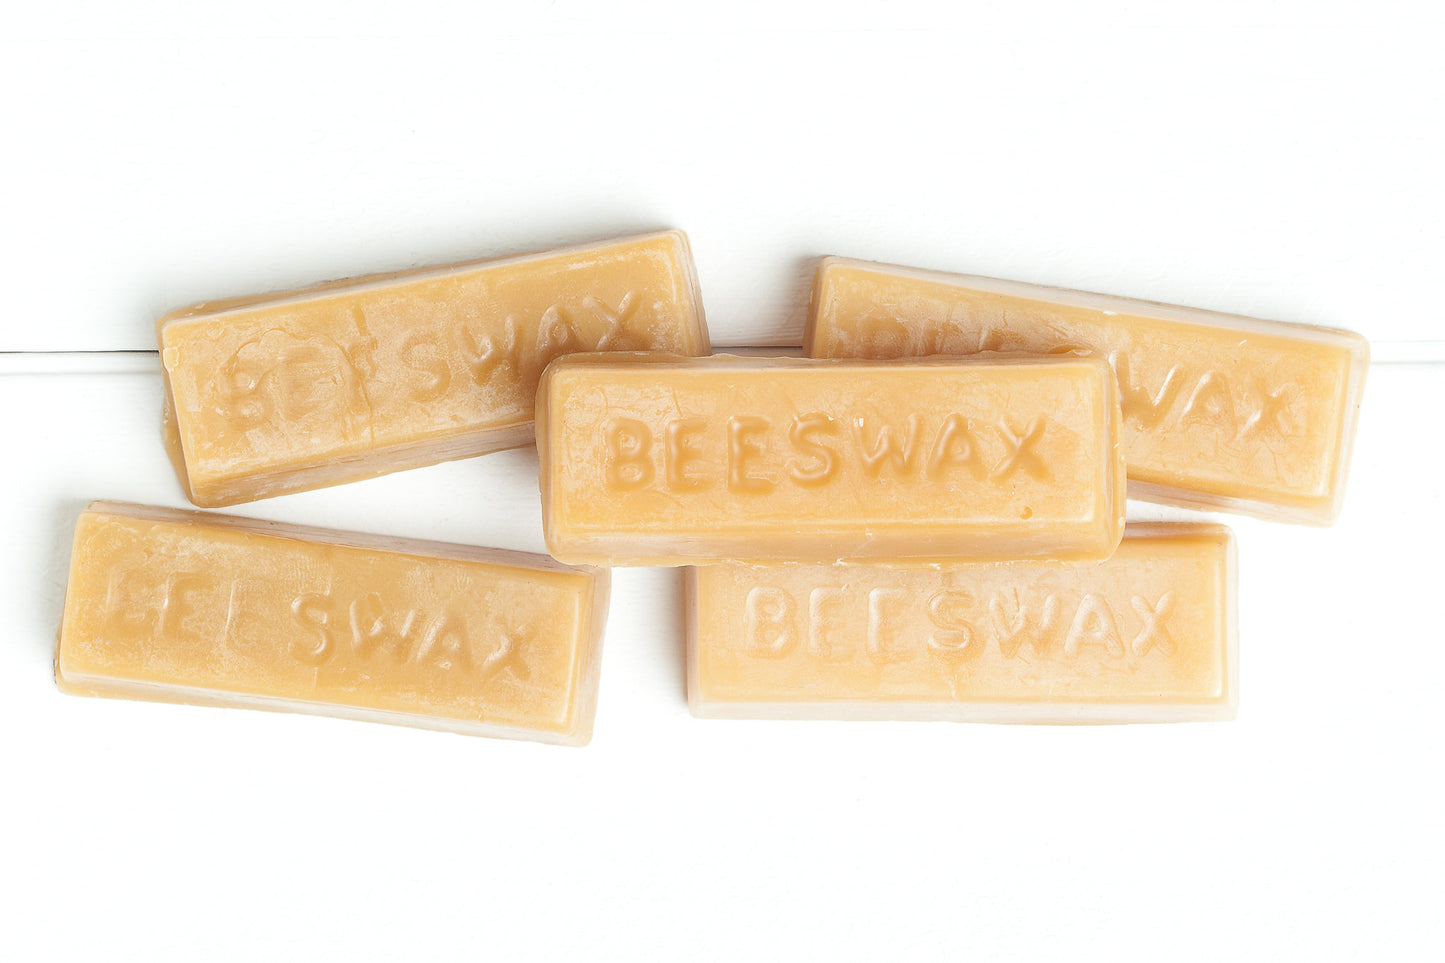 Beeswax Block by Fusion